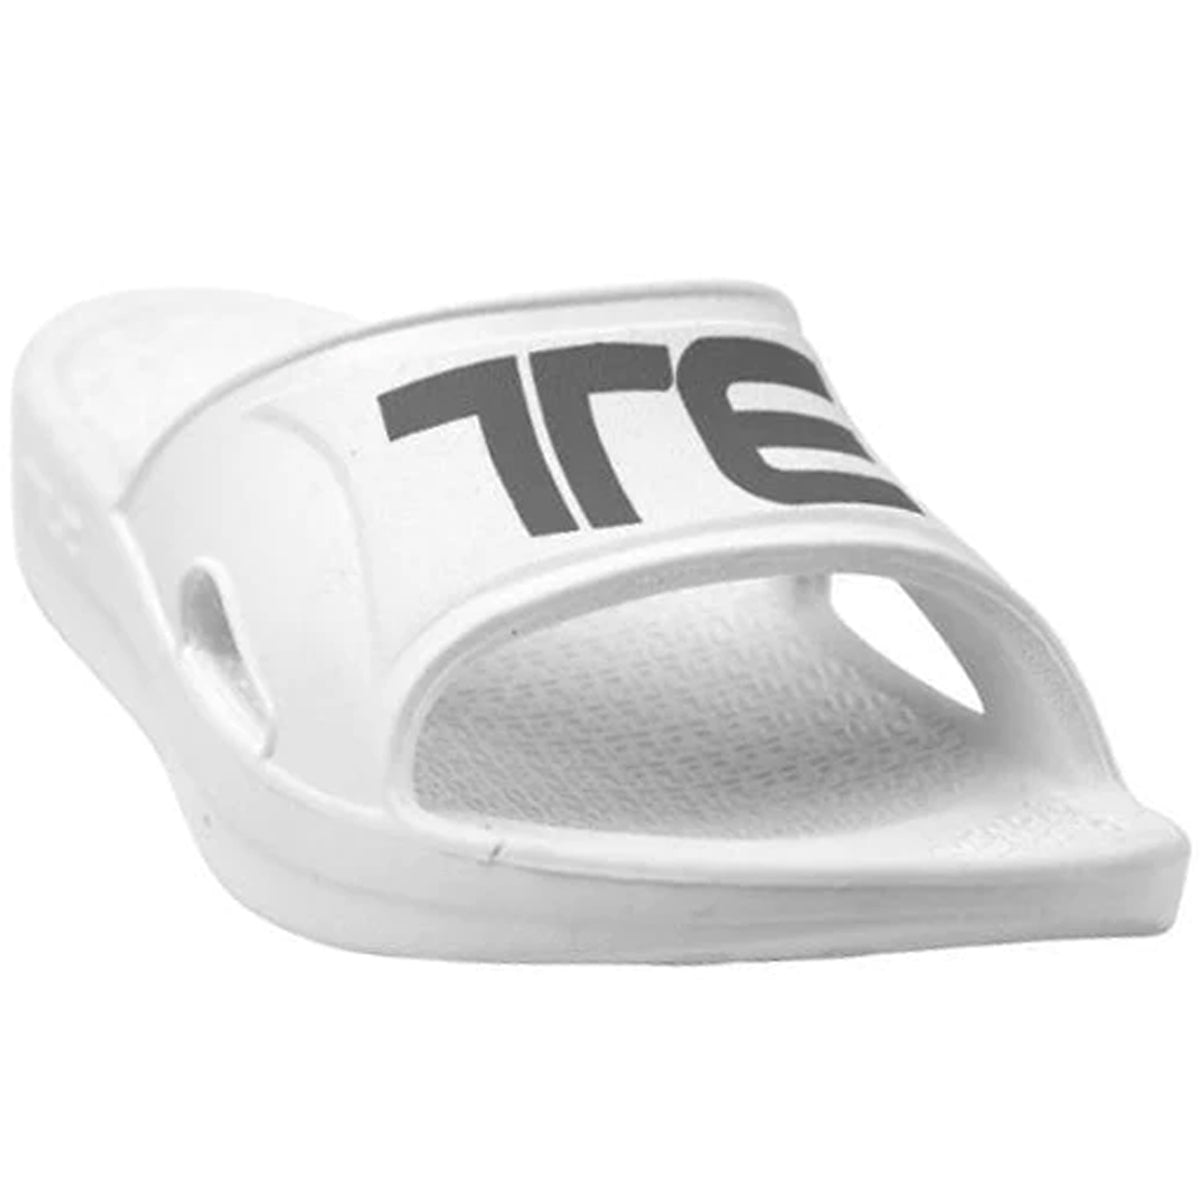 Telic Recharge Arch Support Comfort Slide Sandals - Snow White Telic